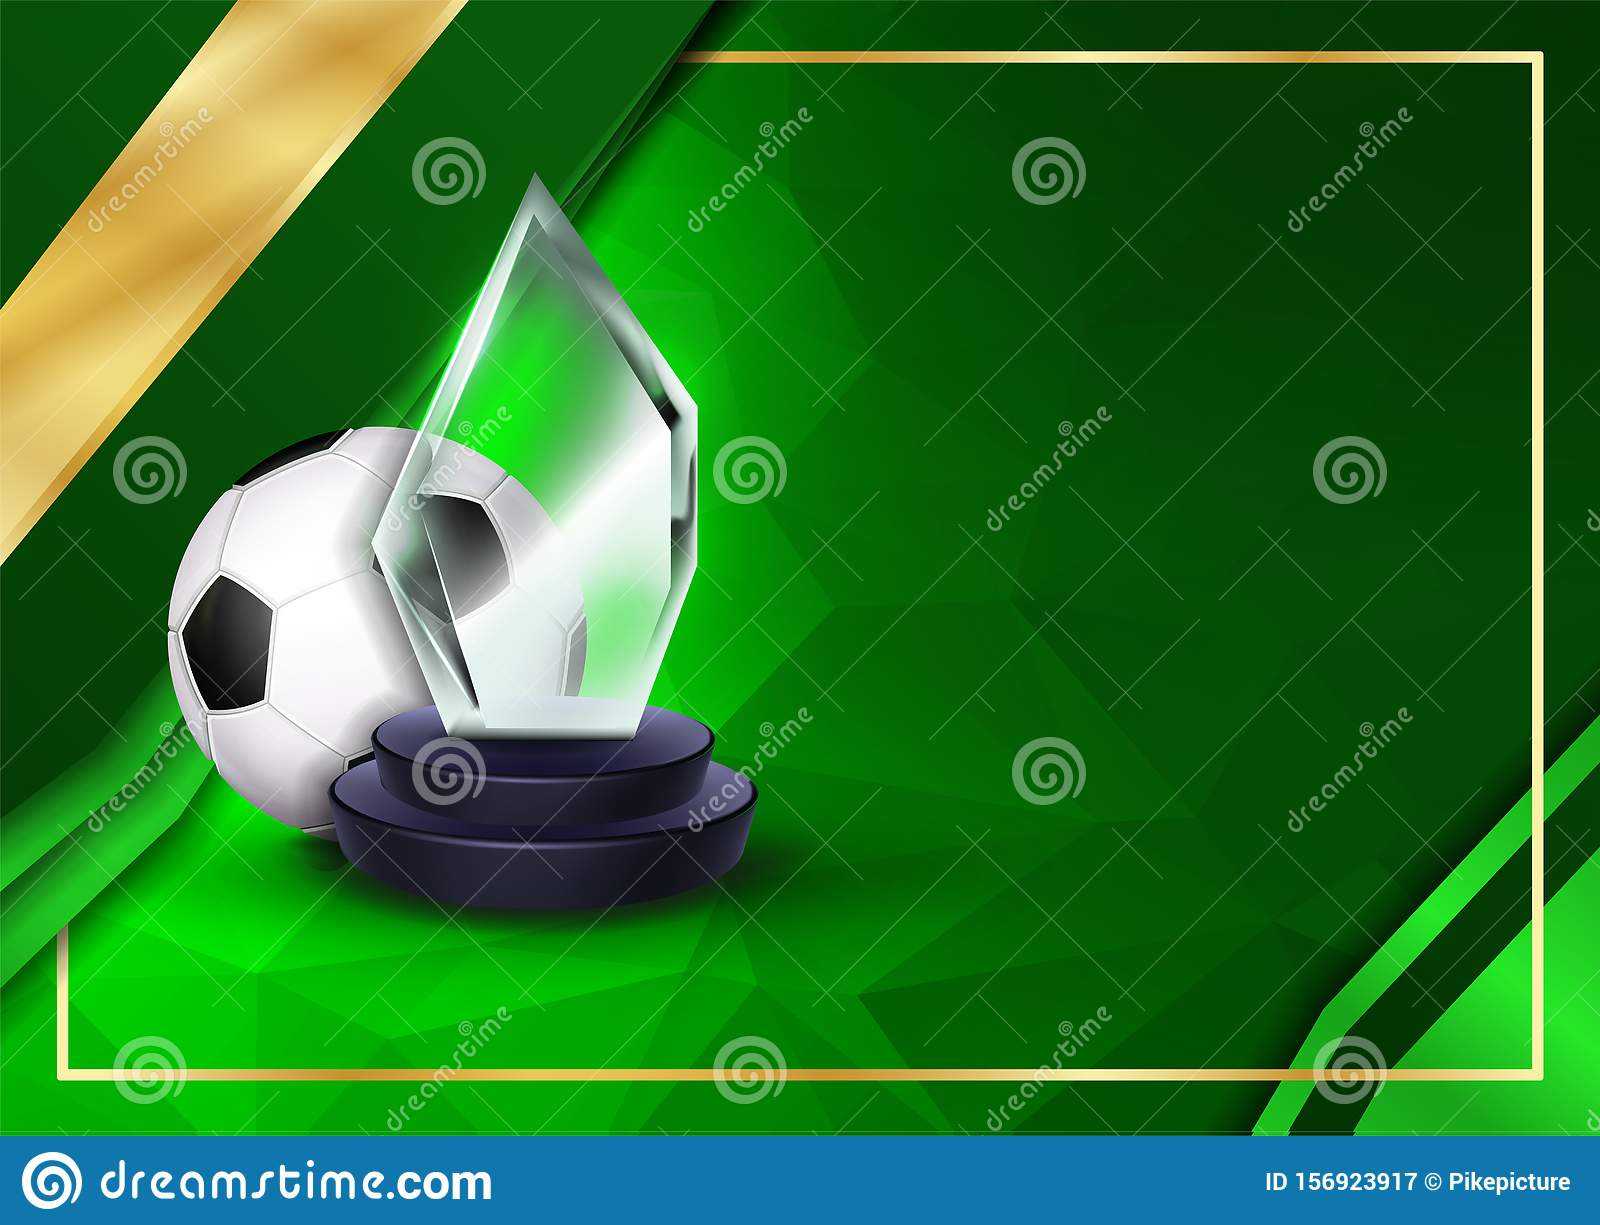 Soccer Certificate Diploma With Glass Trophy Vector. Sport Intended For Soccer Certificate Template Free